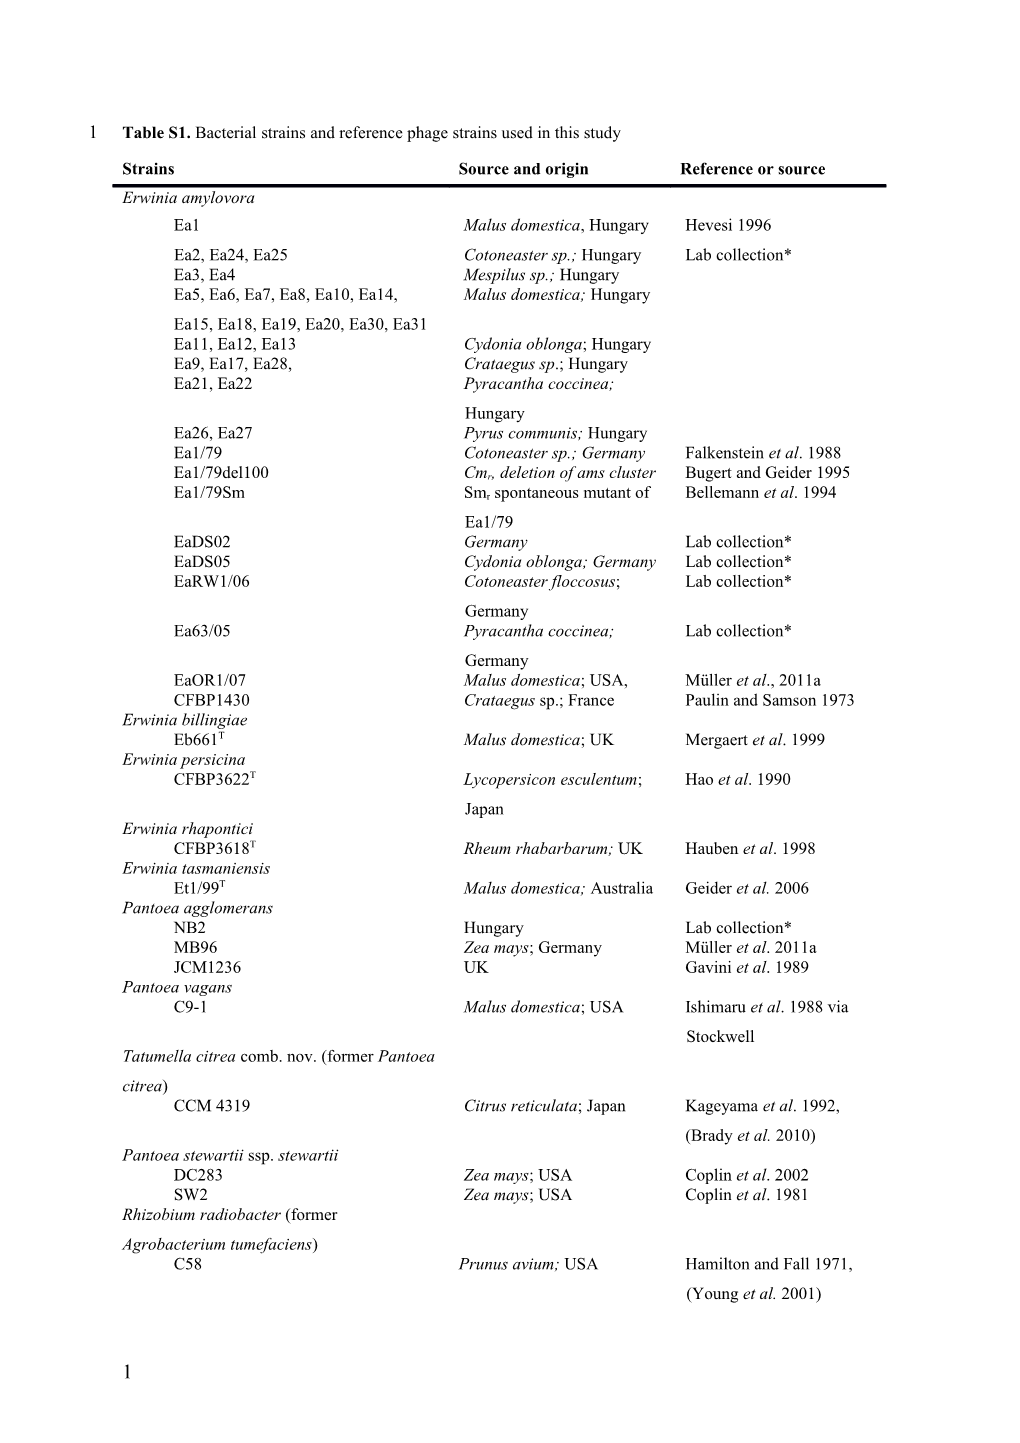 Table S1. Bacterial Strains and Reference Phage Strains Used in This Study